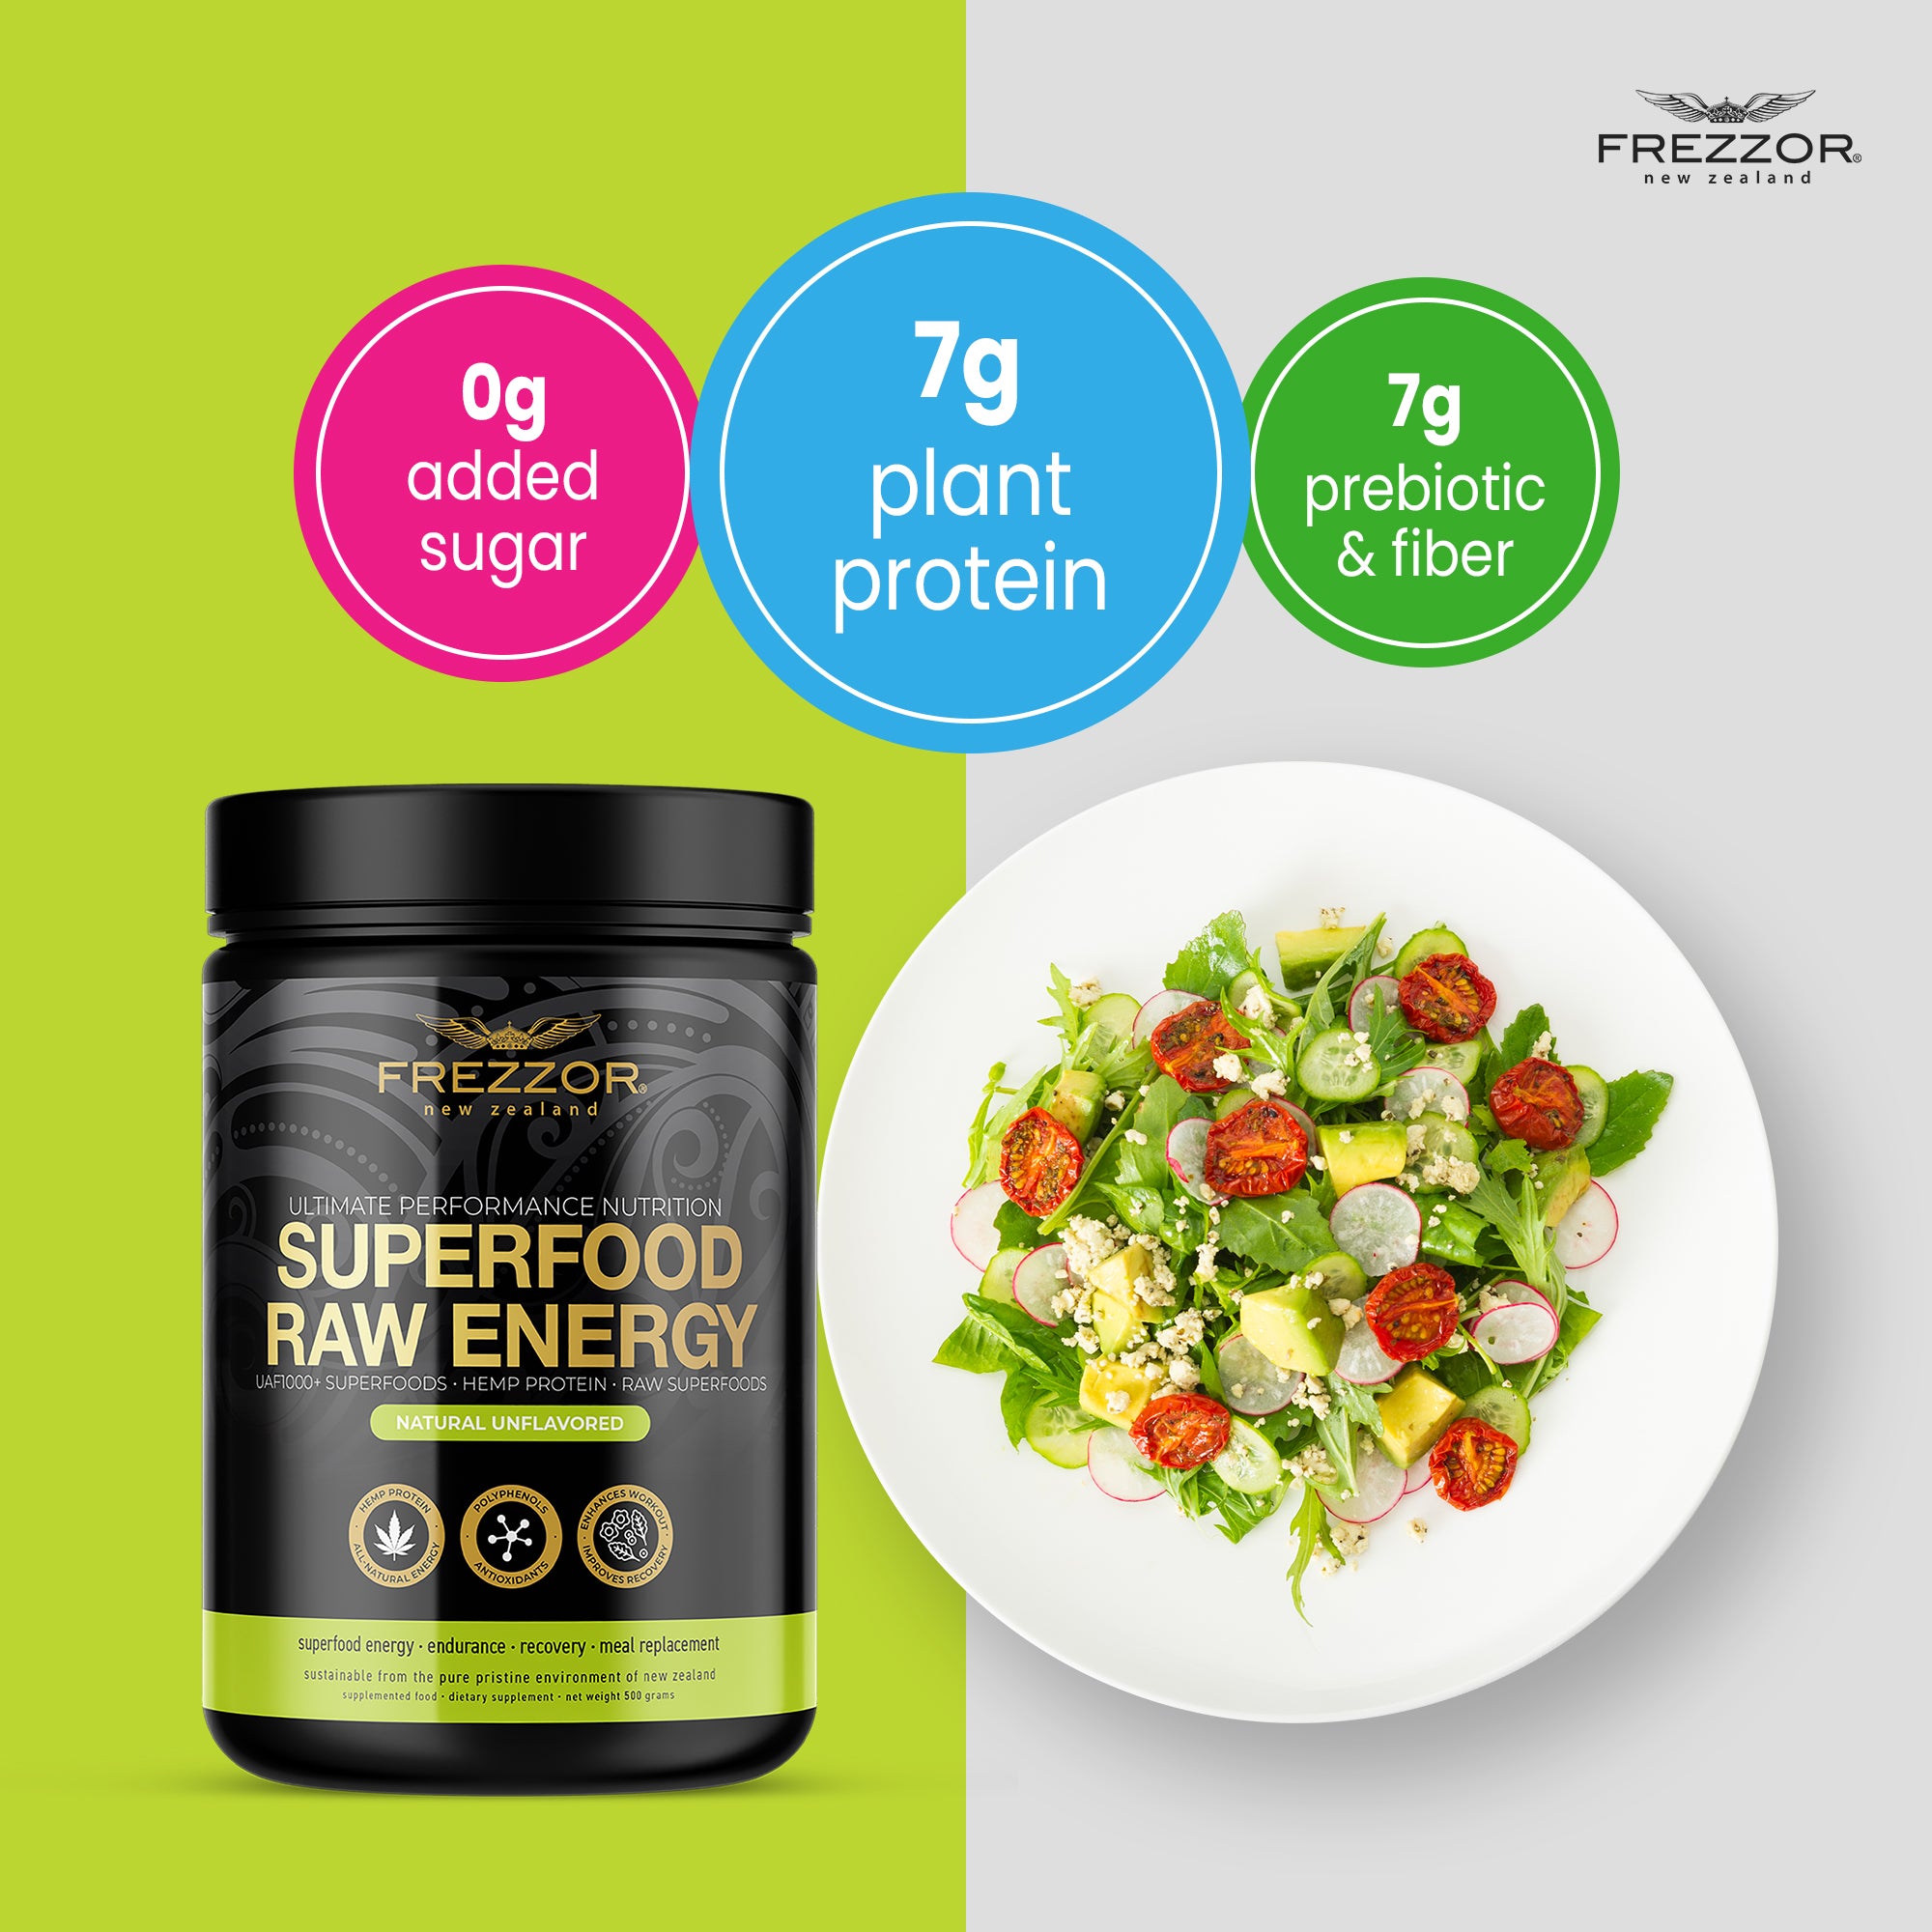 Superfood Powder  FREZZOR Raw NZ superfood protein powder supplements for daily energy 